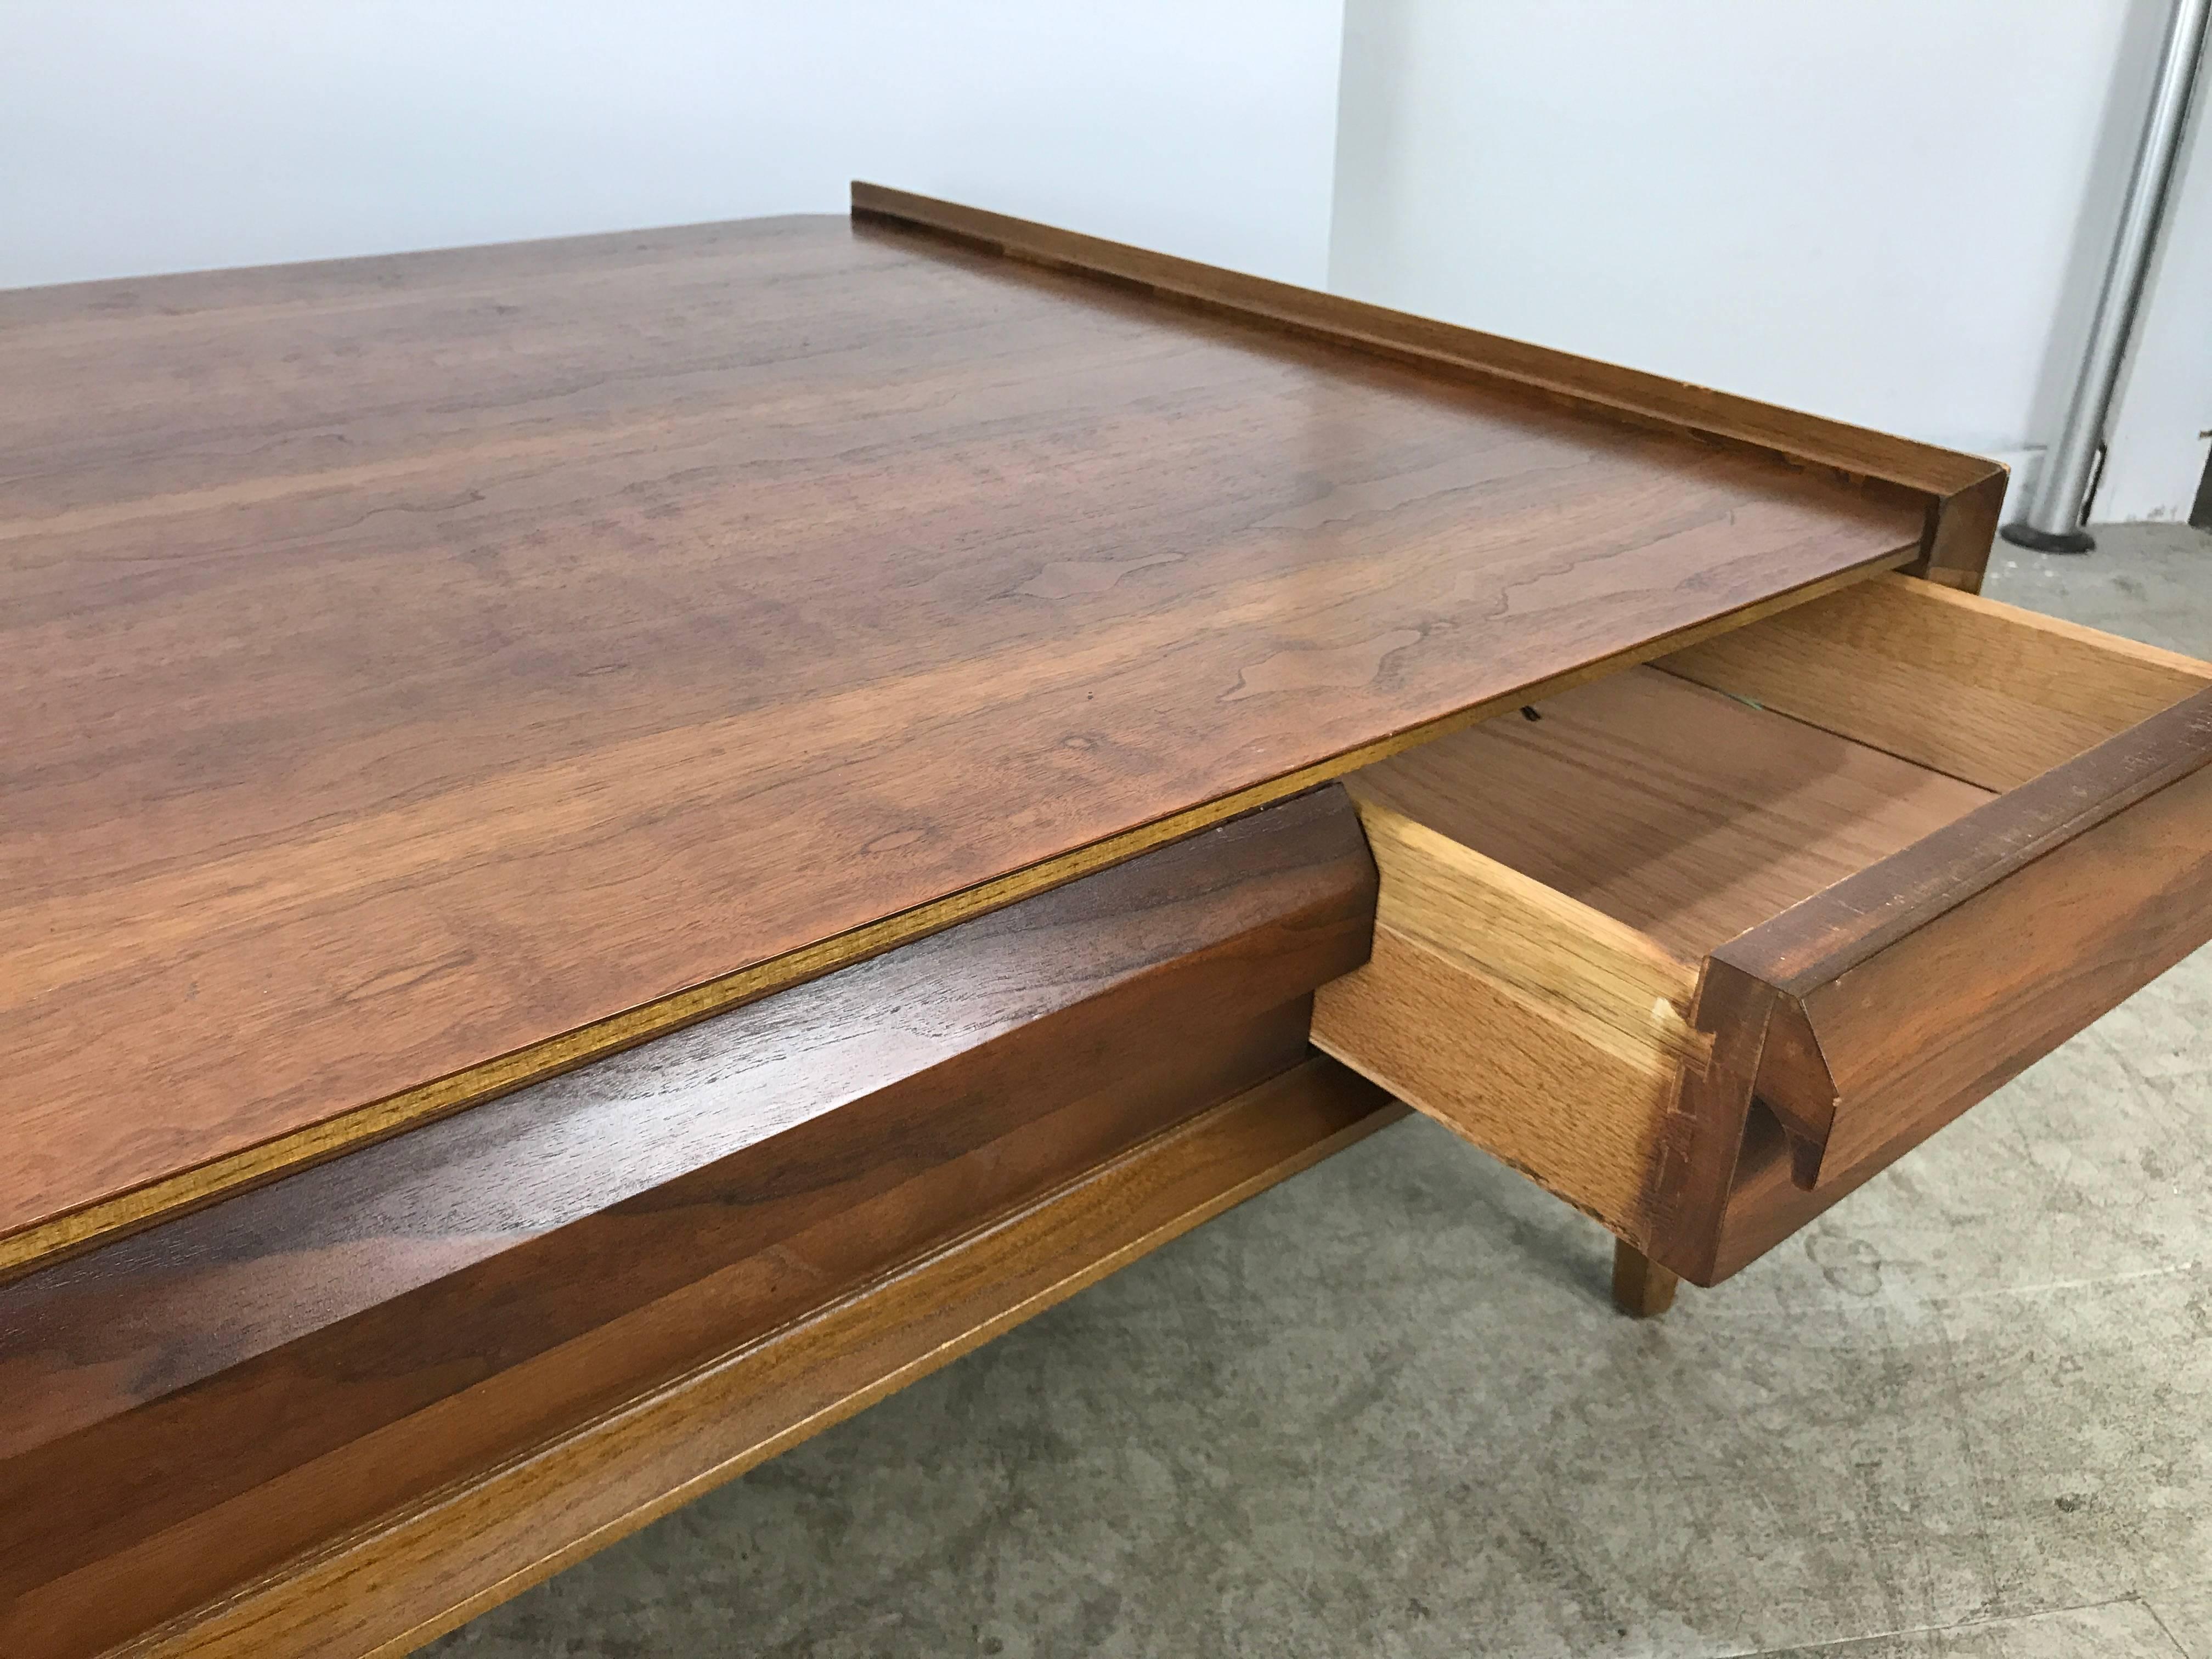 Modernist figured walnut cocktail table by Andre Bus for Lane. Classic modernist design, wonderful figured walnut, superior quality and construction, featuring 12 inch x 33 inch single drawer that opens from either side. Stunning! Hand delivery